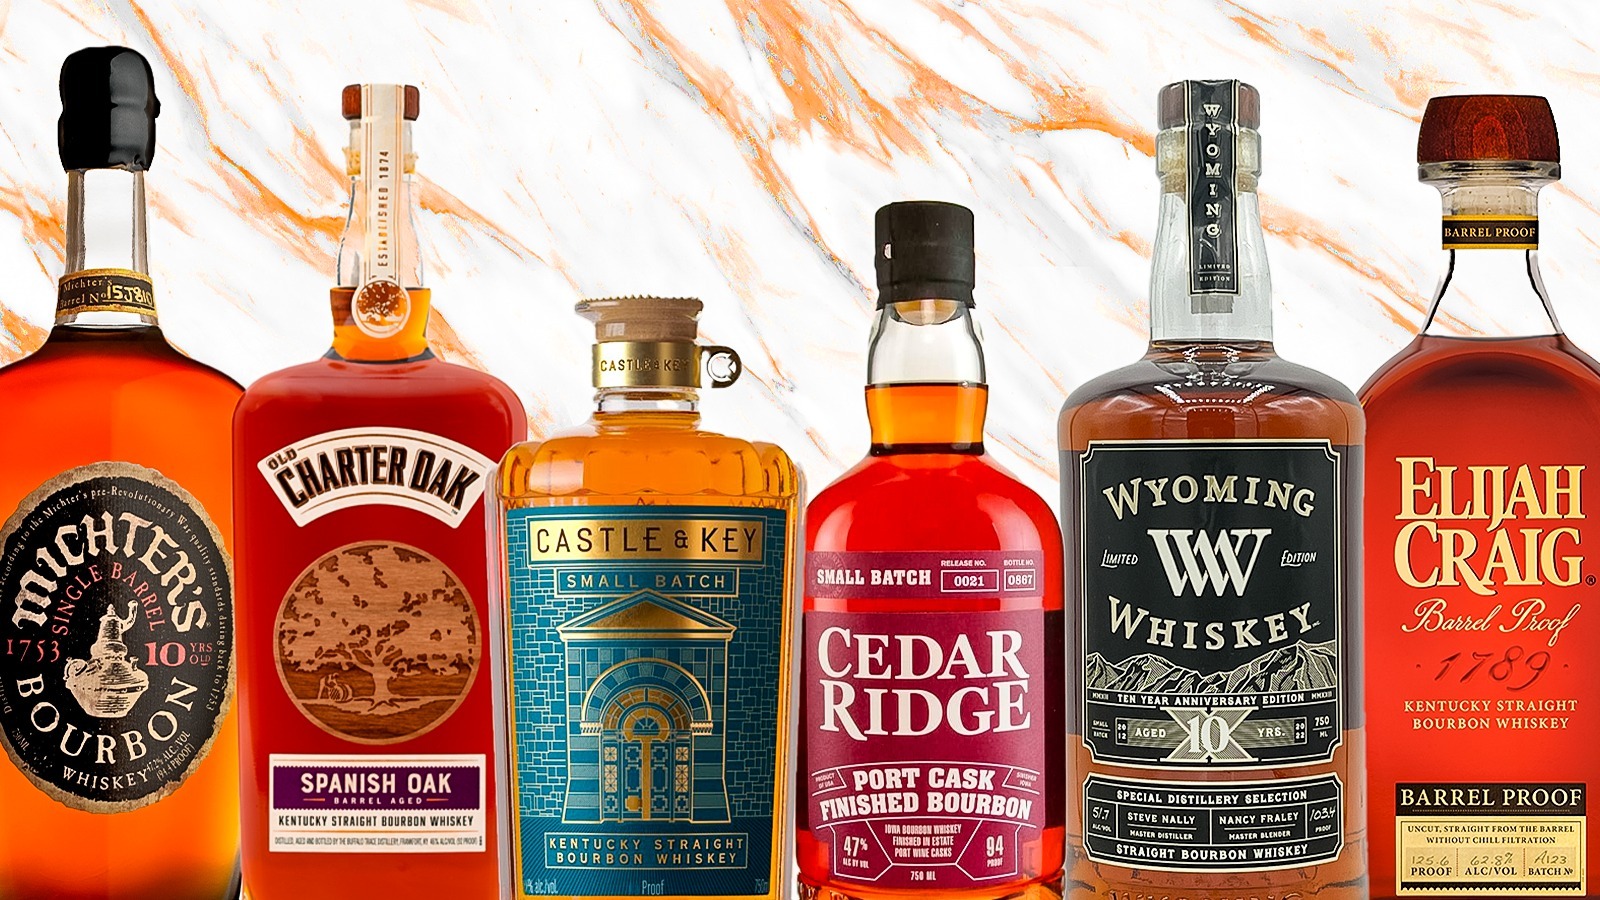 JIM BEAM® LAUNCHES READY-TO-DRINK COCKTAILS JUST IN TIME FOR SPRING